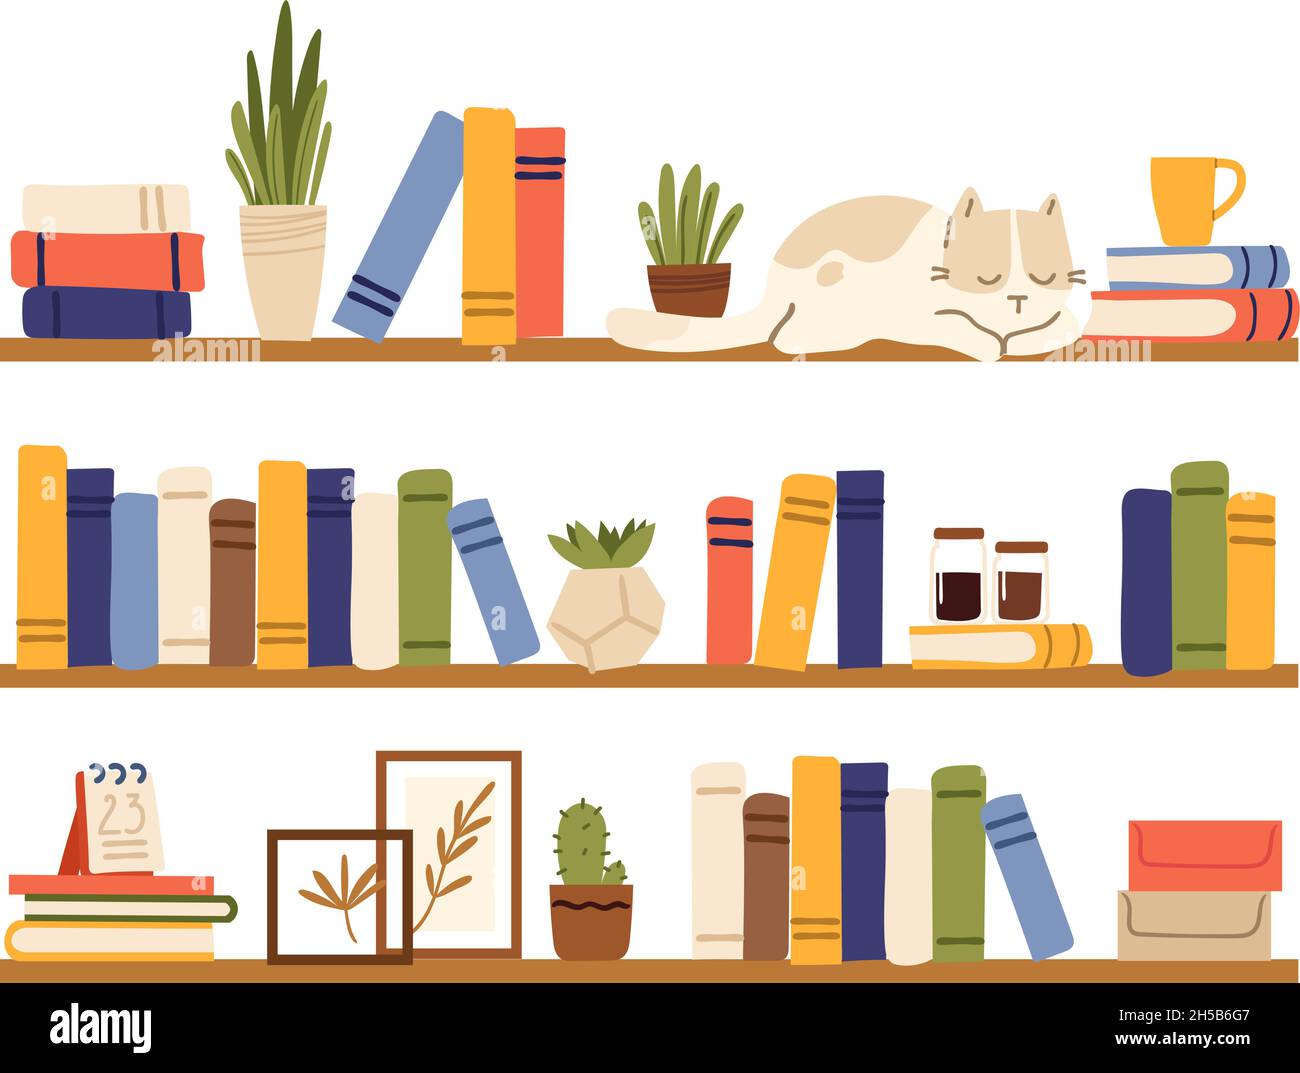 Book shelves. Rack books, interior bookshelf with cat, plants in pot and accessories. Isolated comfy scandinavian style home shelf, bookcase vector Stock Vector